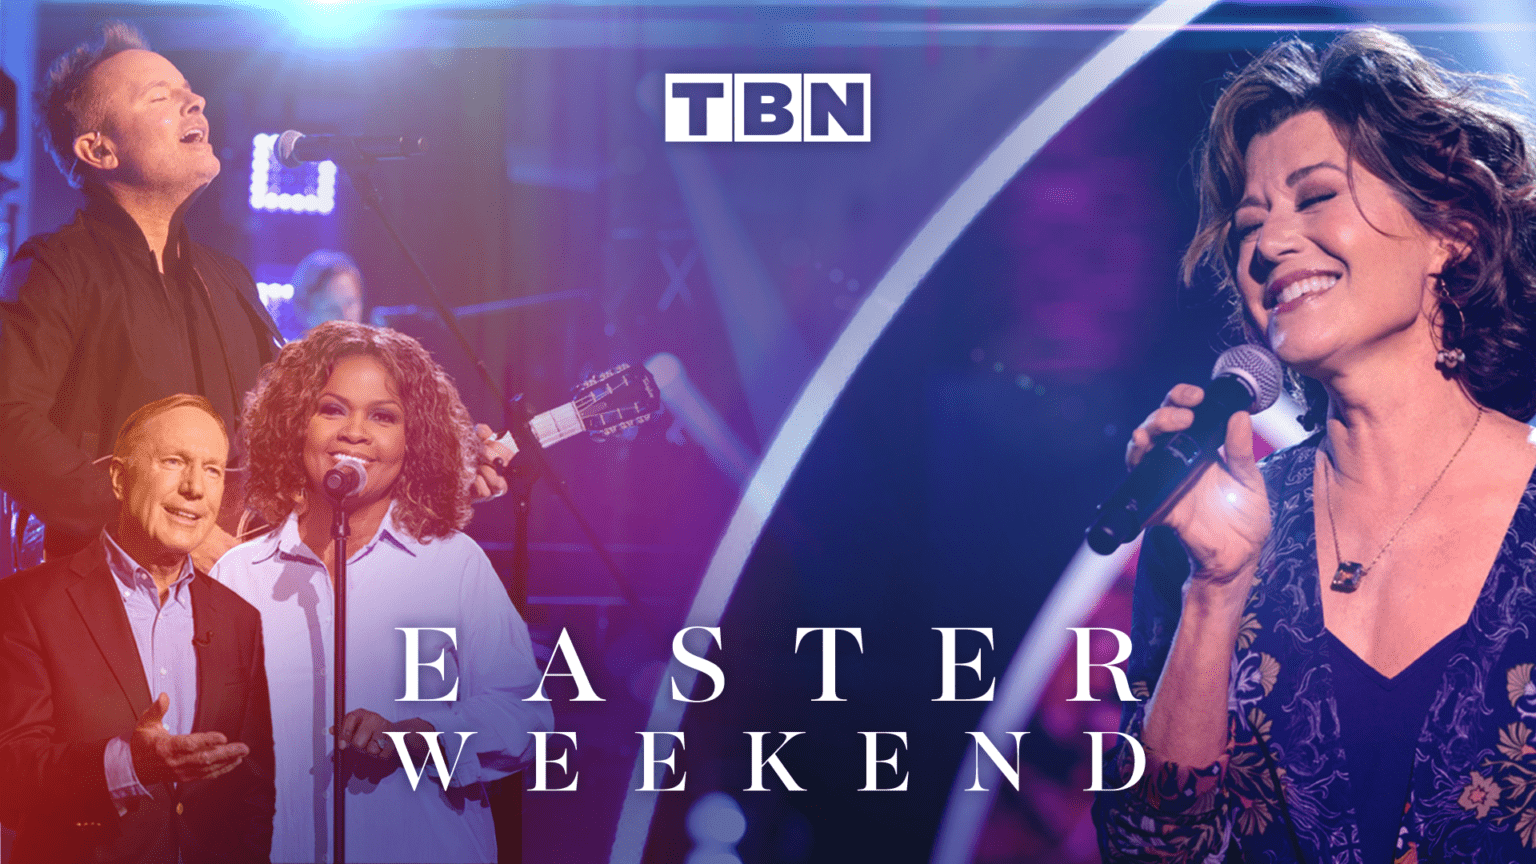 TBN to Air Full Slate of New Programming to Celebrate Easter Weekend